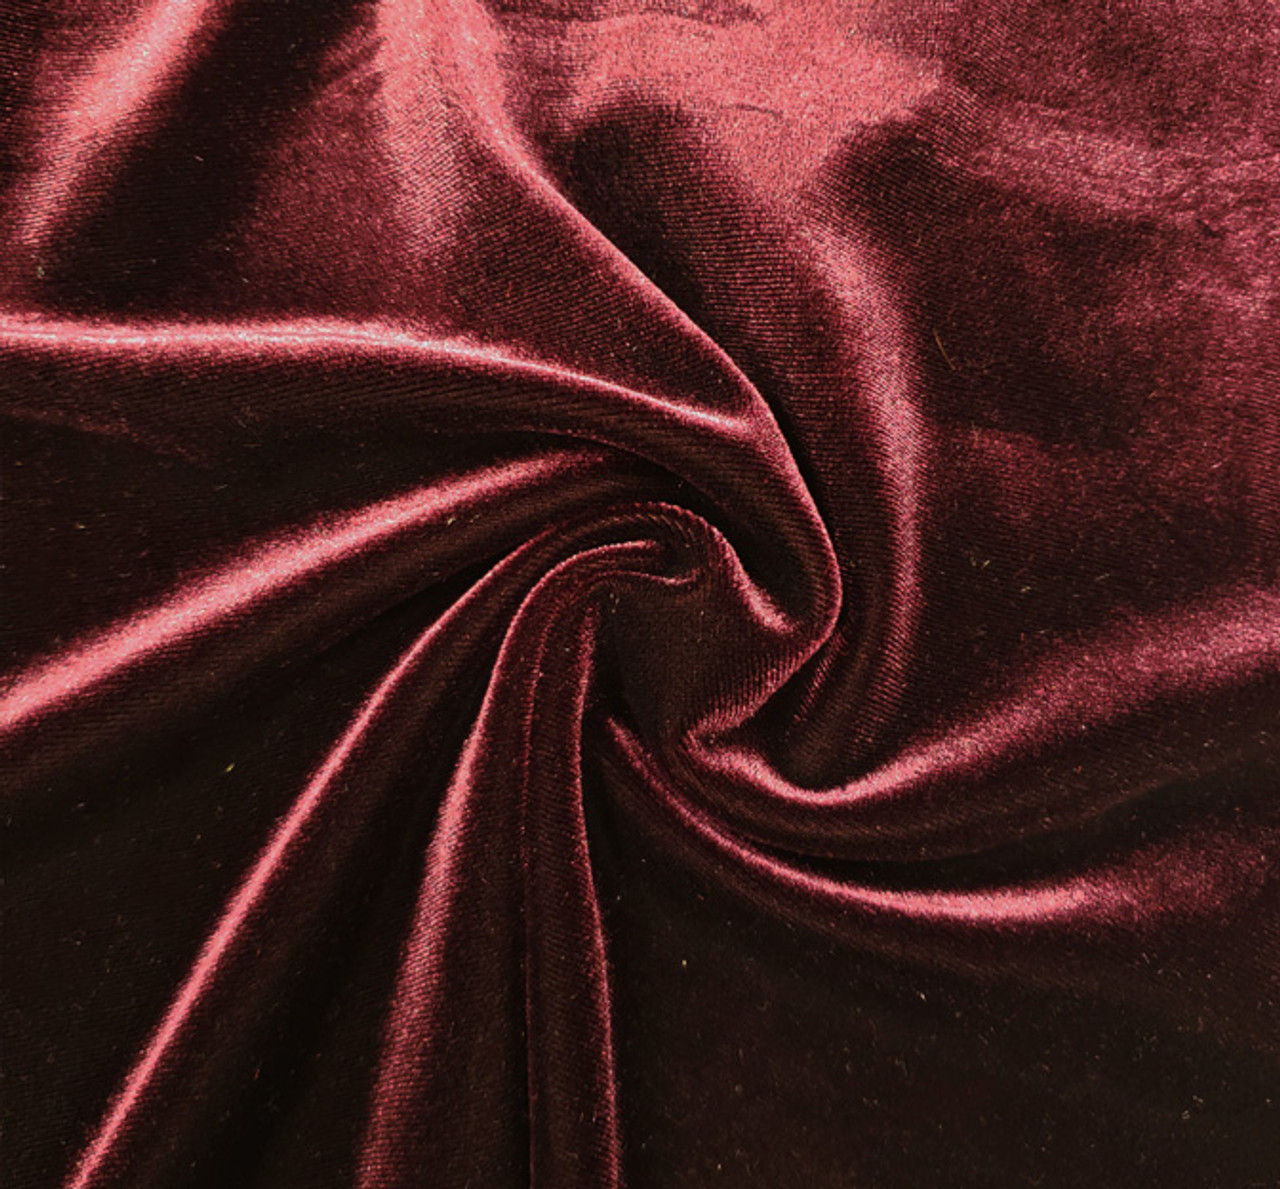 Stretch Velvet Solid New Maroon Width 58/60 Apparel Fabric